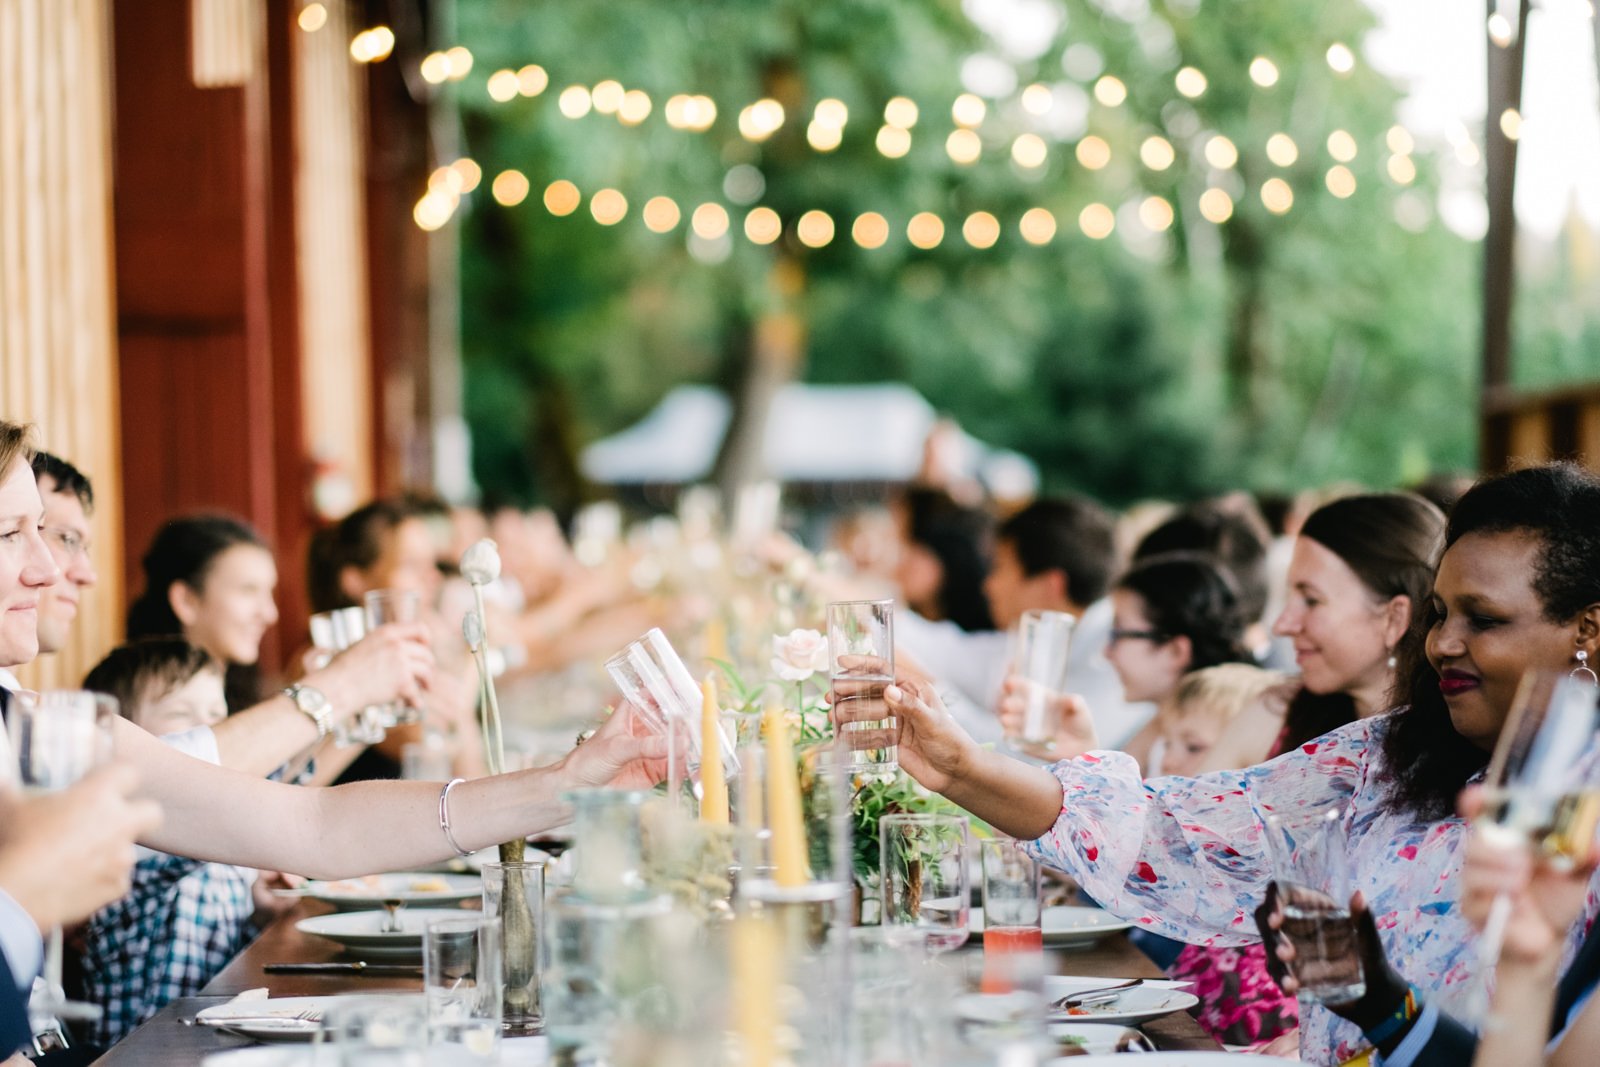  Wedding guests cheers glasses with bulb lights and greenery behind them 